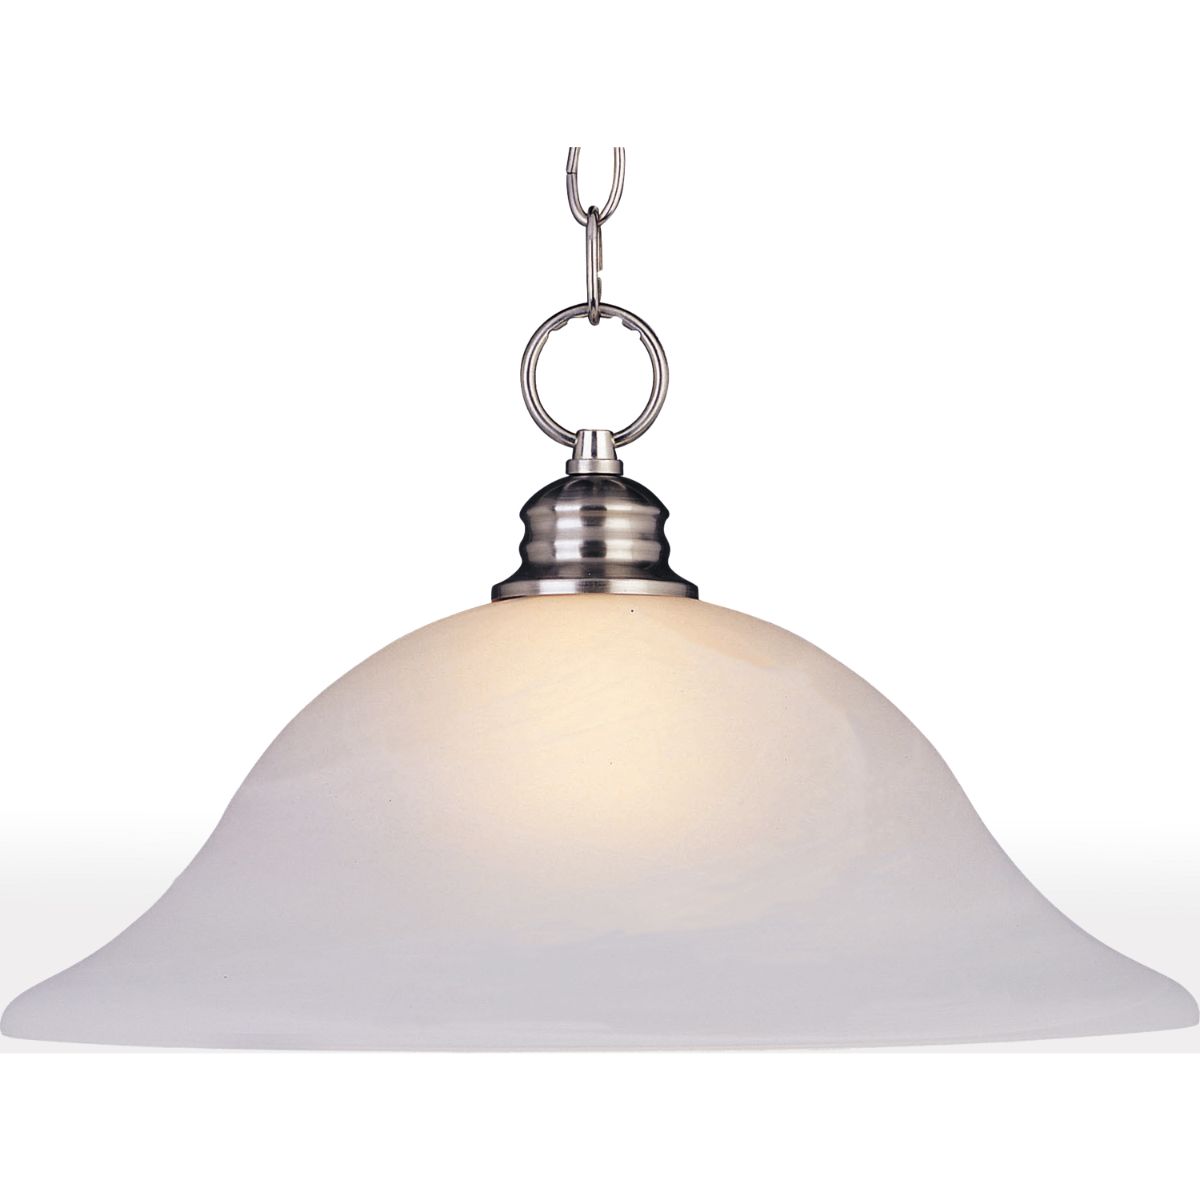 Essentials-9106x 16 in. Pendant Light Nickel Finish Frosted